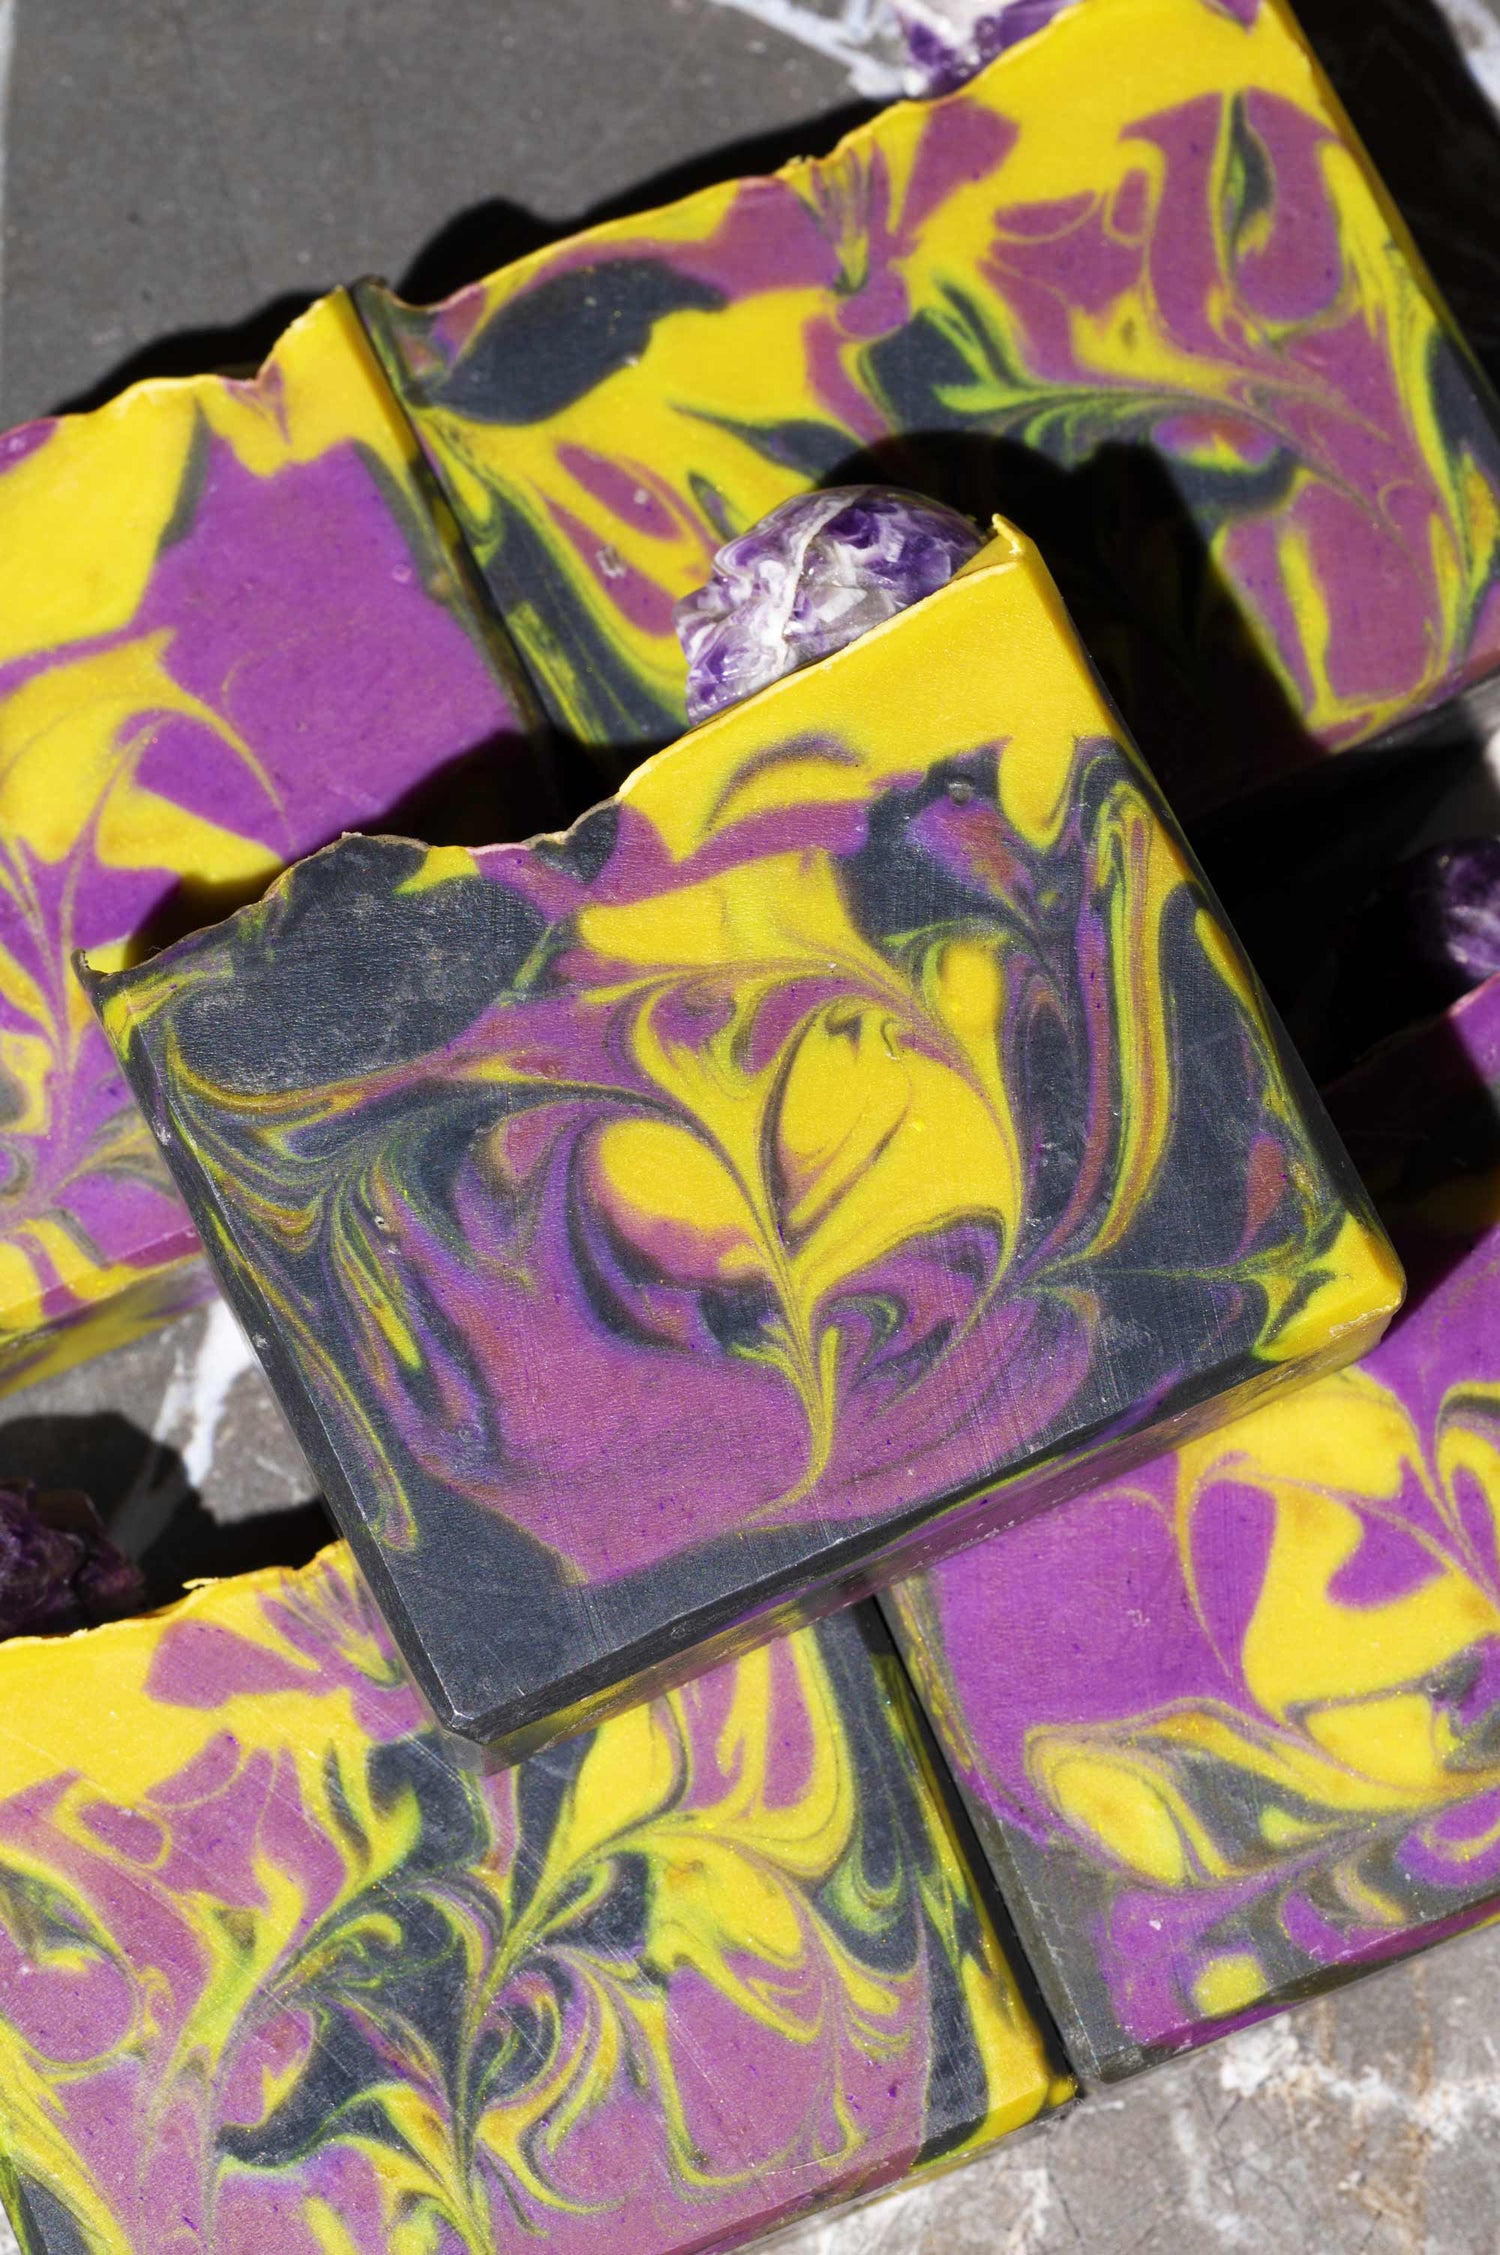 The Witching Hour Artisan Soap